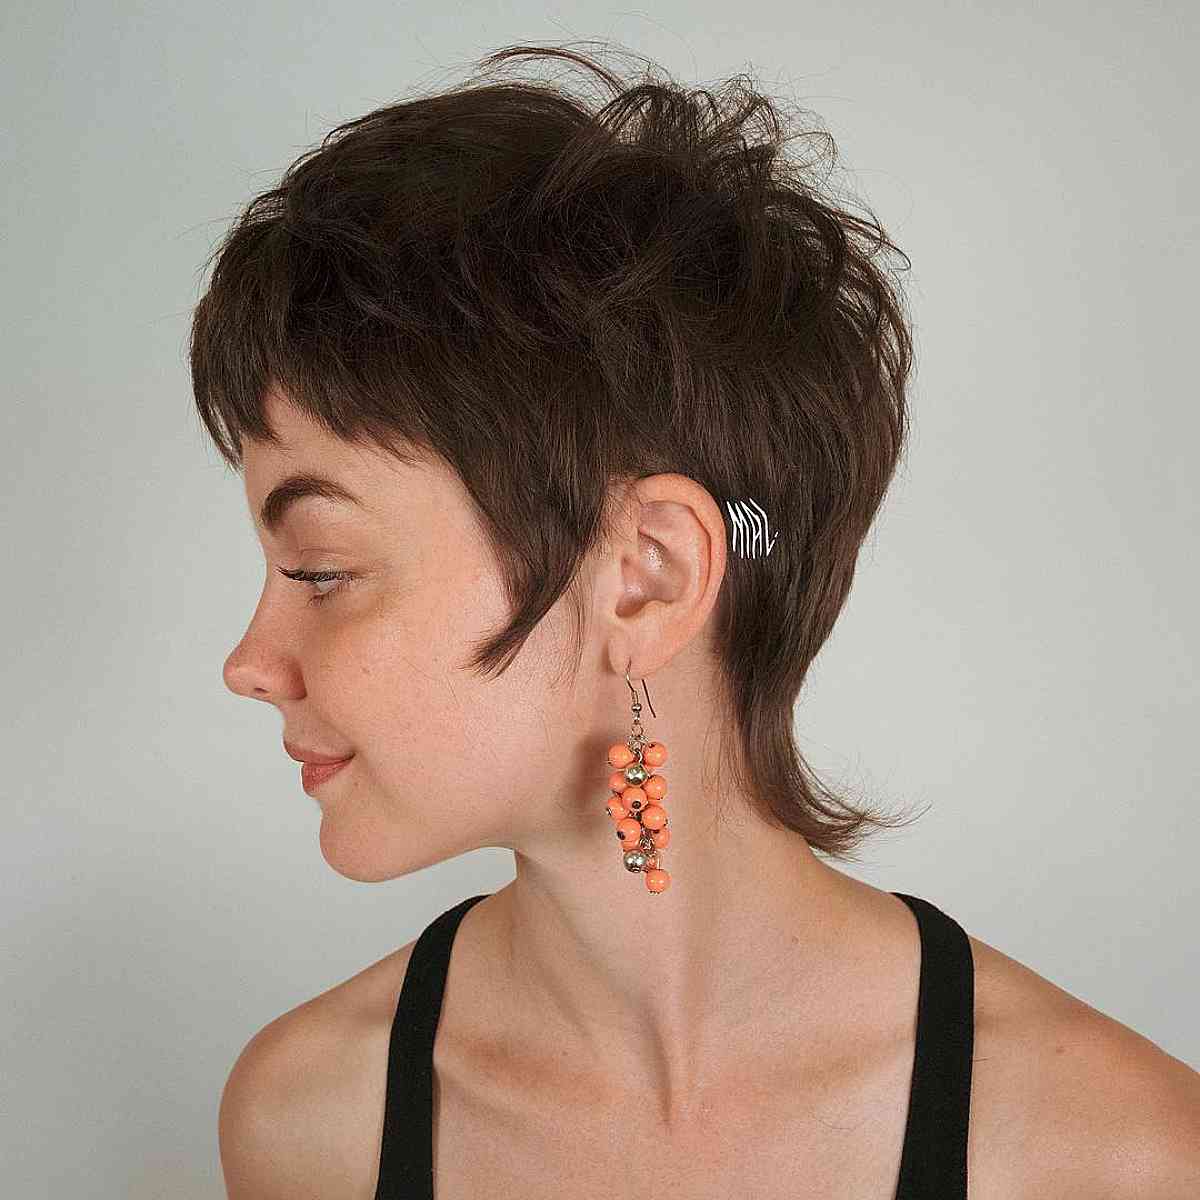 Mini Wolf Shaggy Long Pixie Cut with Short Crown Layers